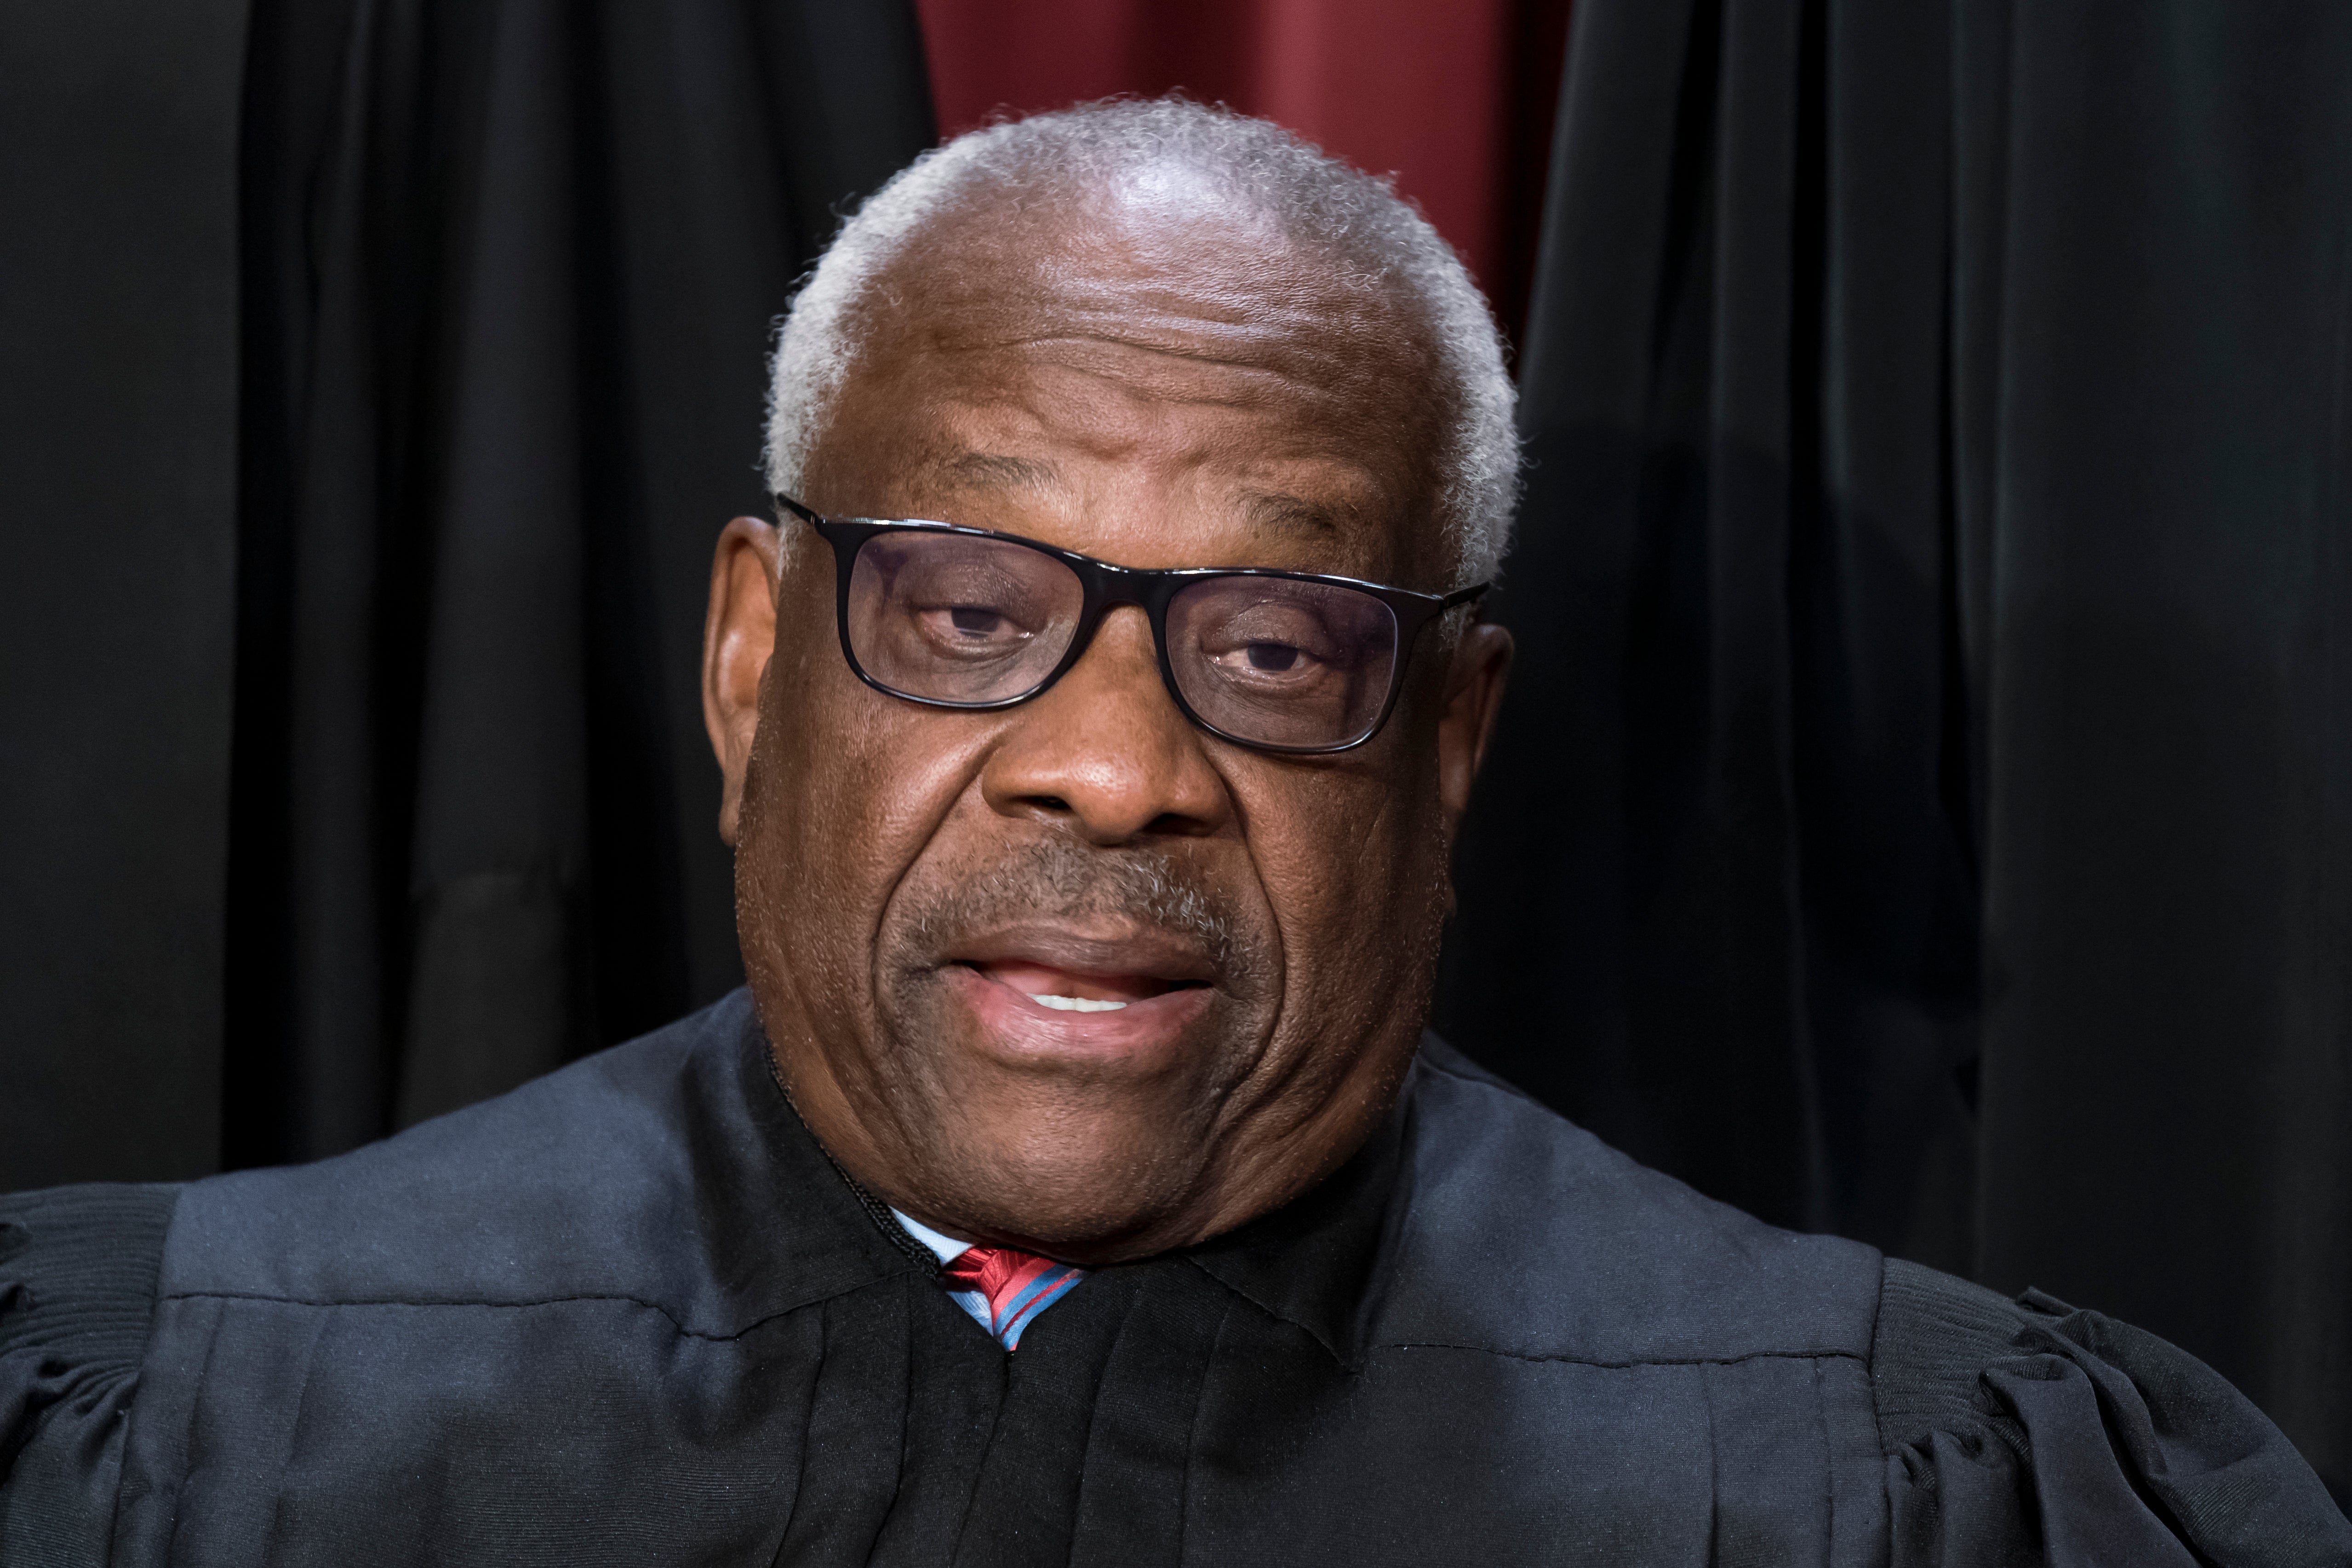 Supreme Court Justice Clarence Thomas received $2.4millon in gifts, a watchdog found amount for nearly half of the $3million justices have received since 2004.